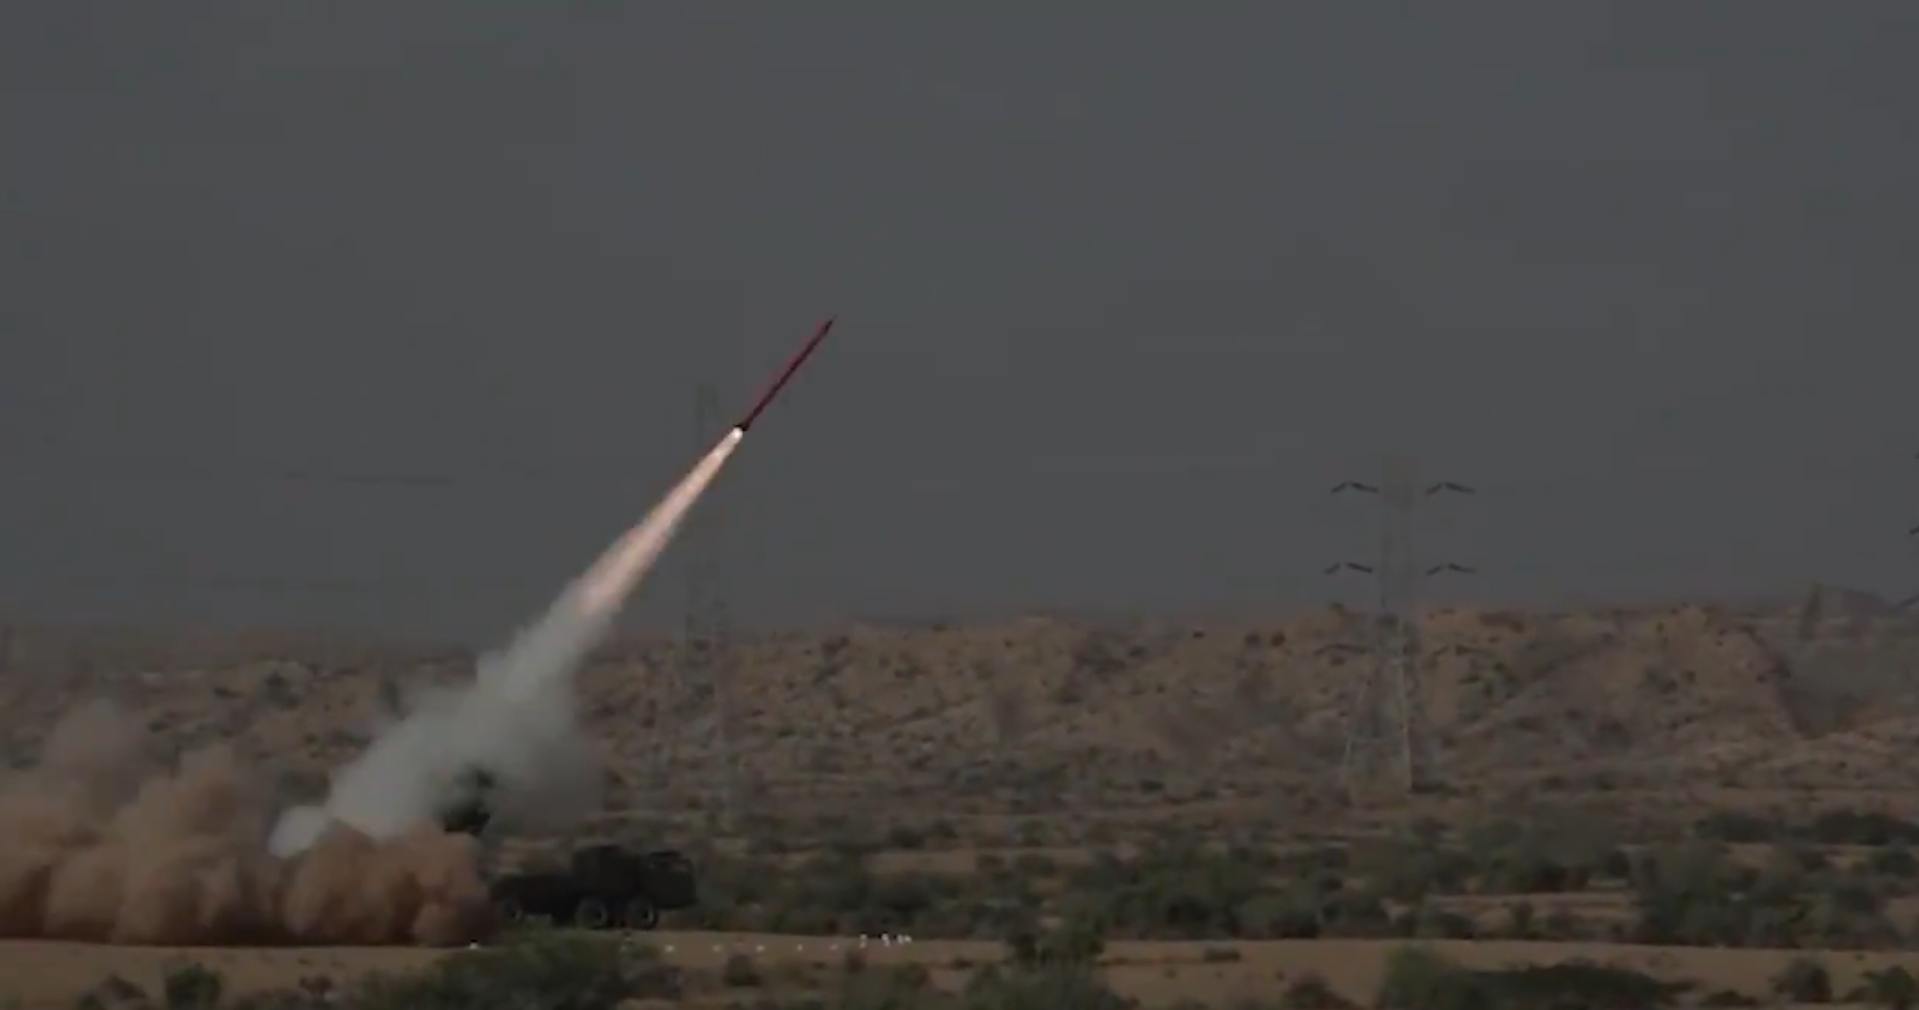 A Fatah-II missile is launched in a plains. It's seen blasting off to the northeast. The plains have green bushes scattered across its yellow sands.